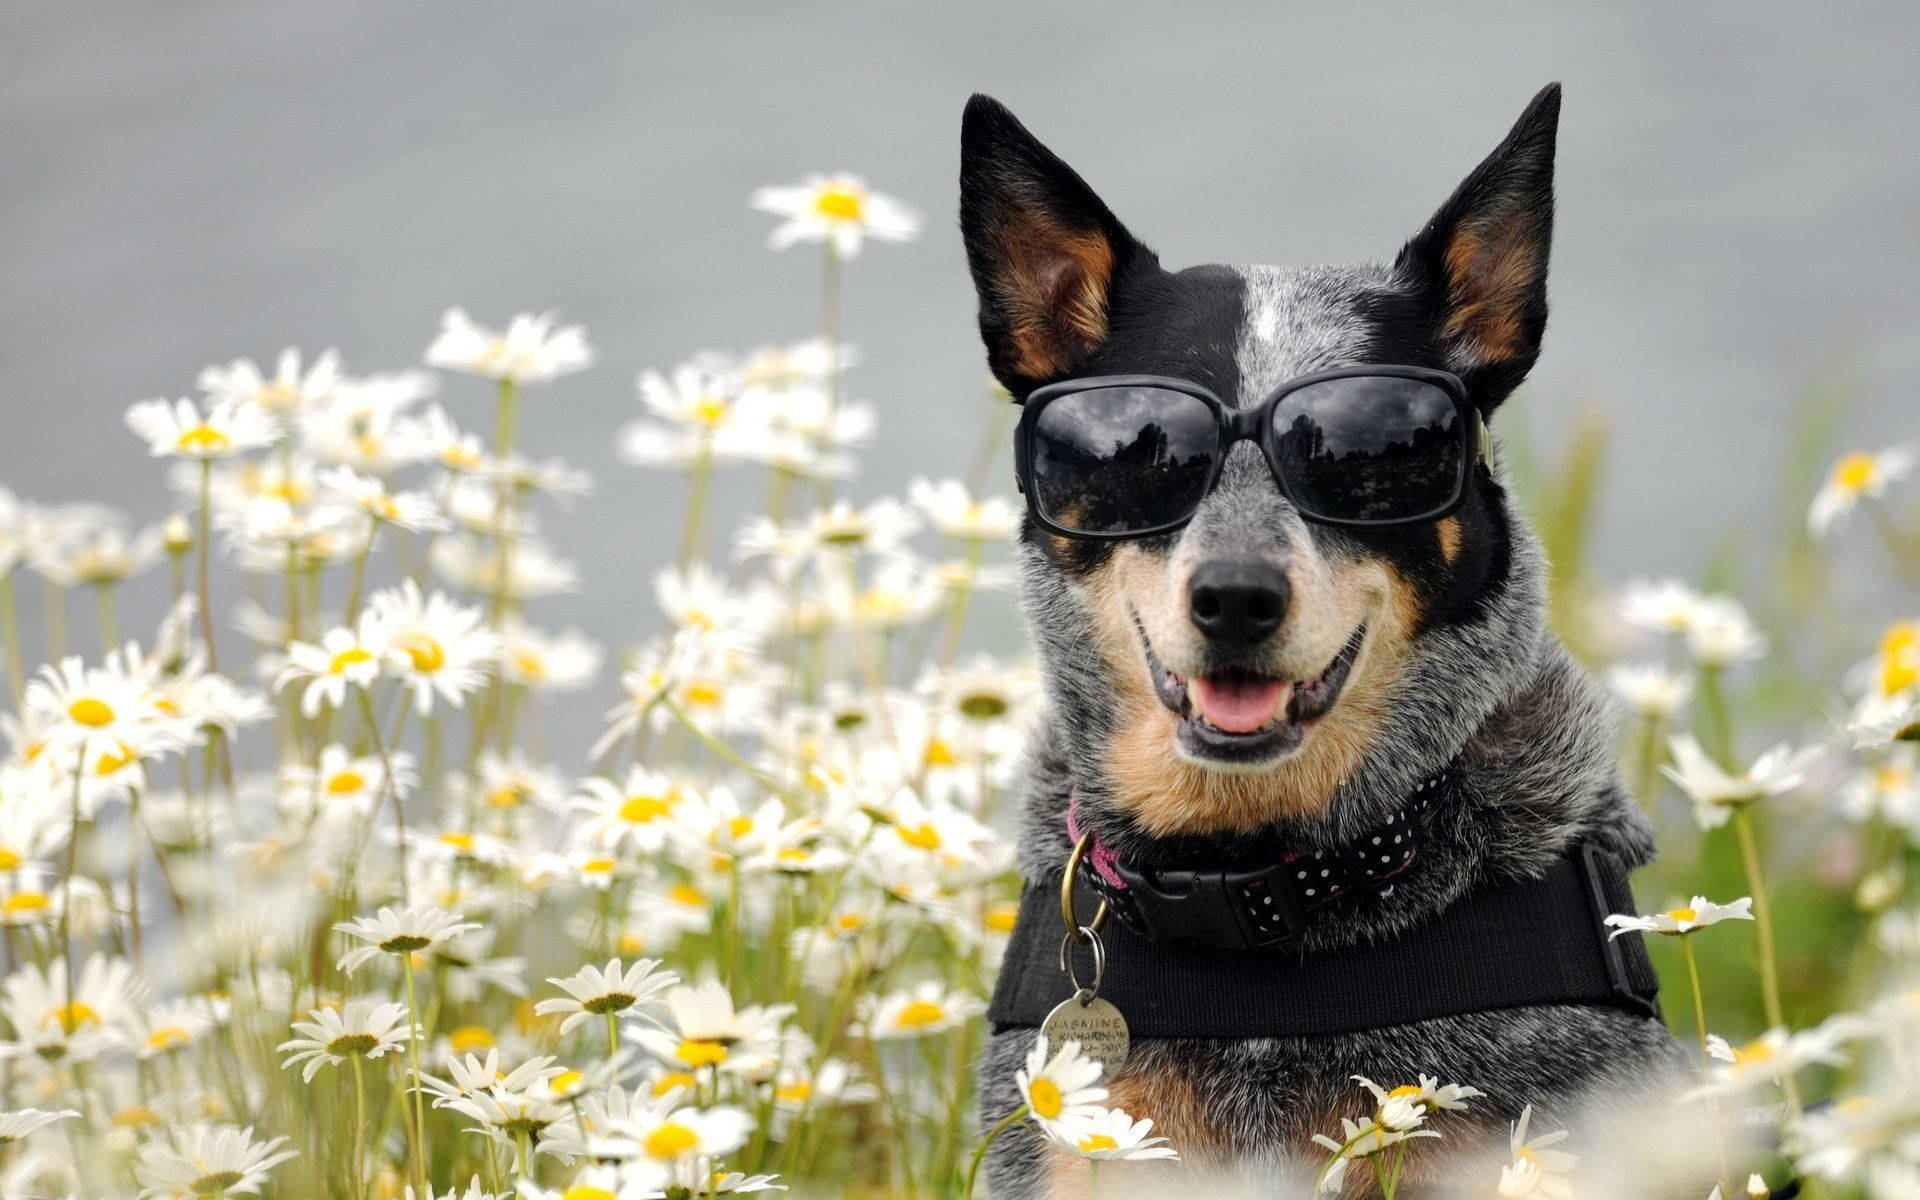 Black Gray Dog With Sunglasses In Daisies